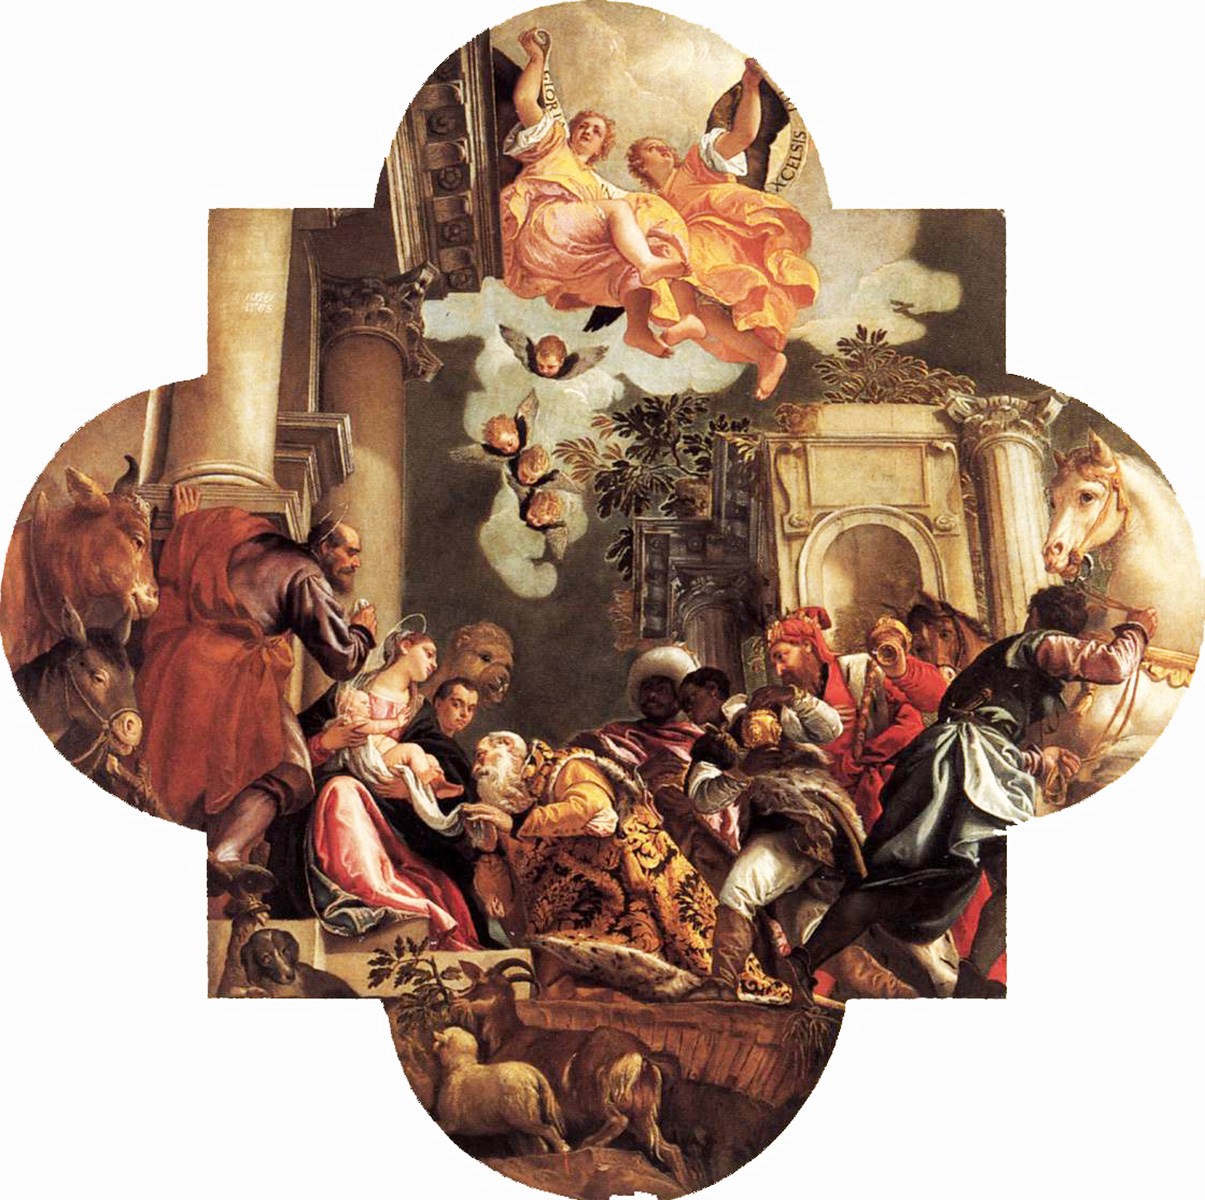 adoration of the magi by Paolo Veronese